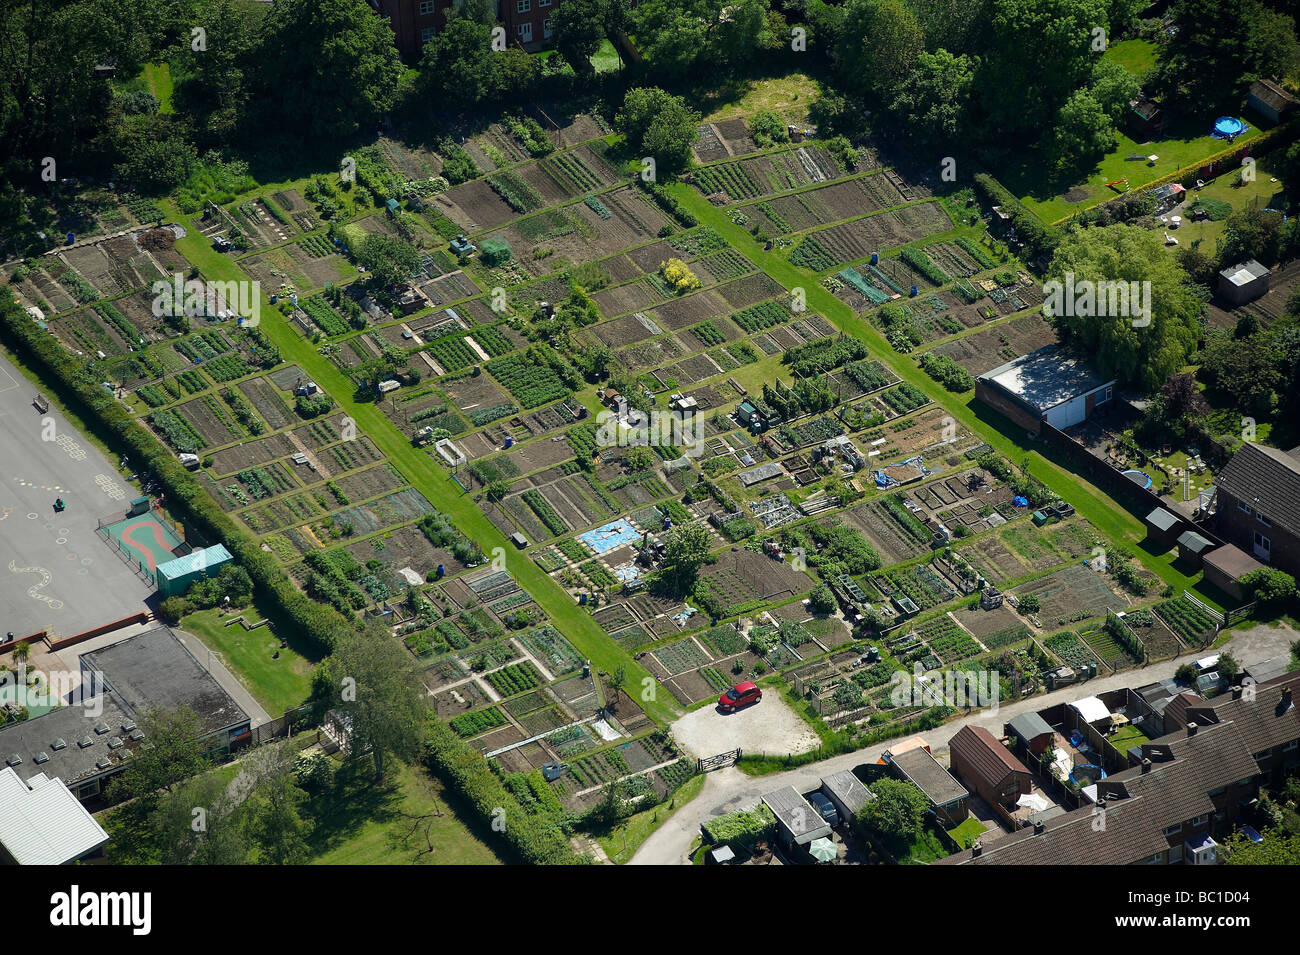 Gardening Allotments from the air, Staffordshire, UK Stock Photo